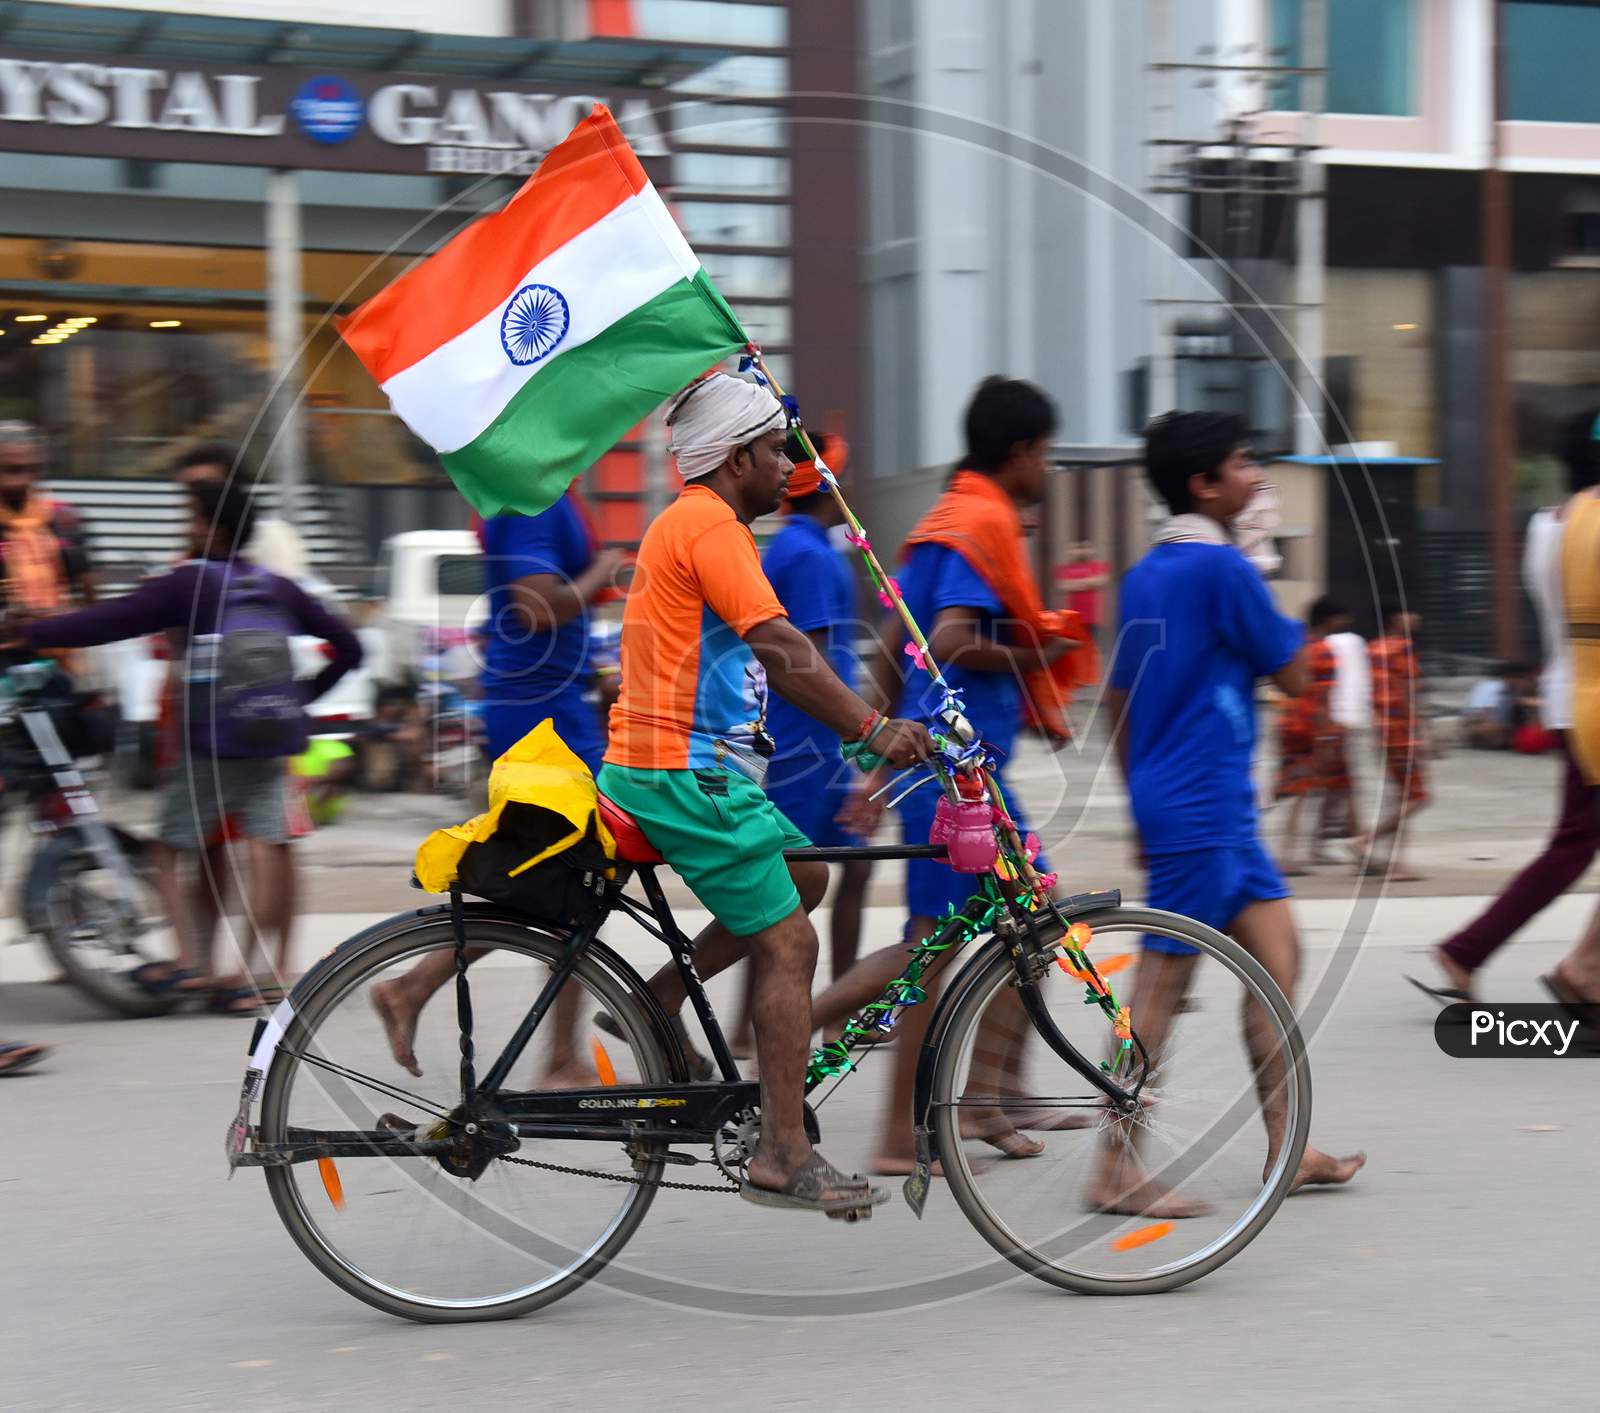 People Of India Holding Indian National Flag And  Riding On two Wheeler Vehicles As a Part of Freedom Rally During Independence Day